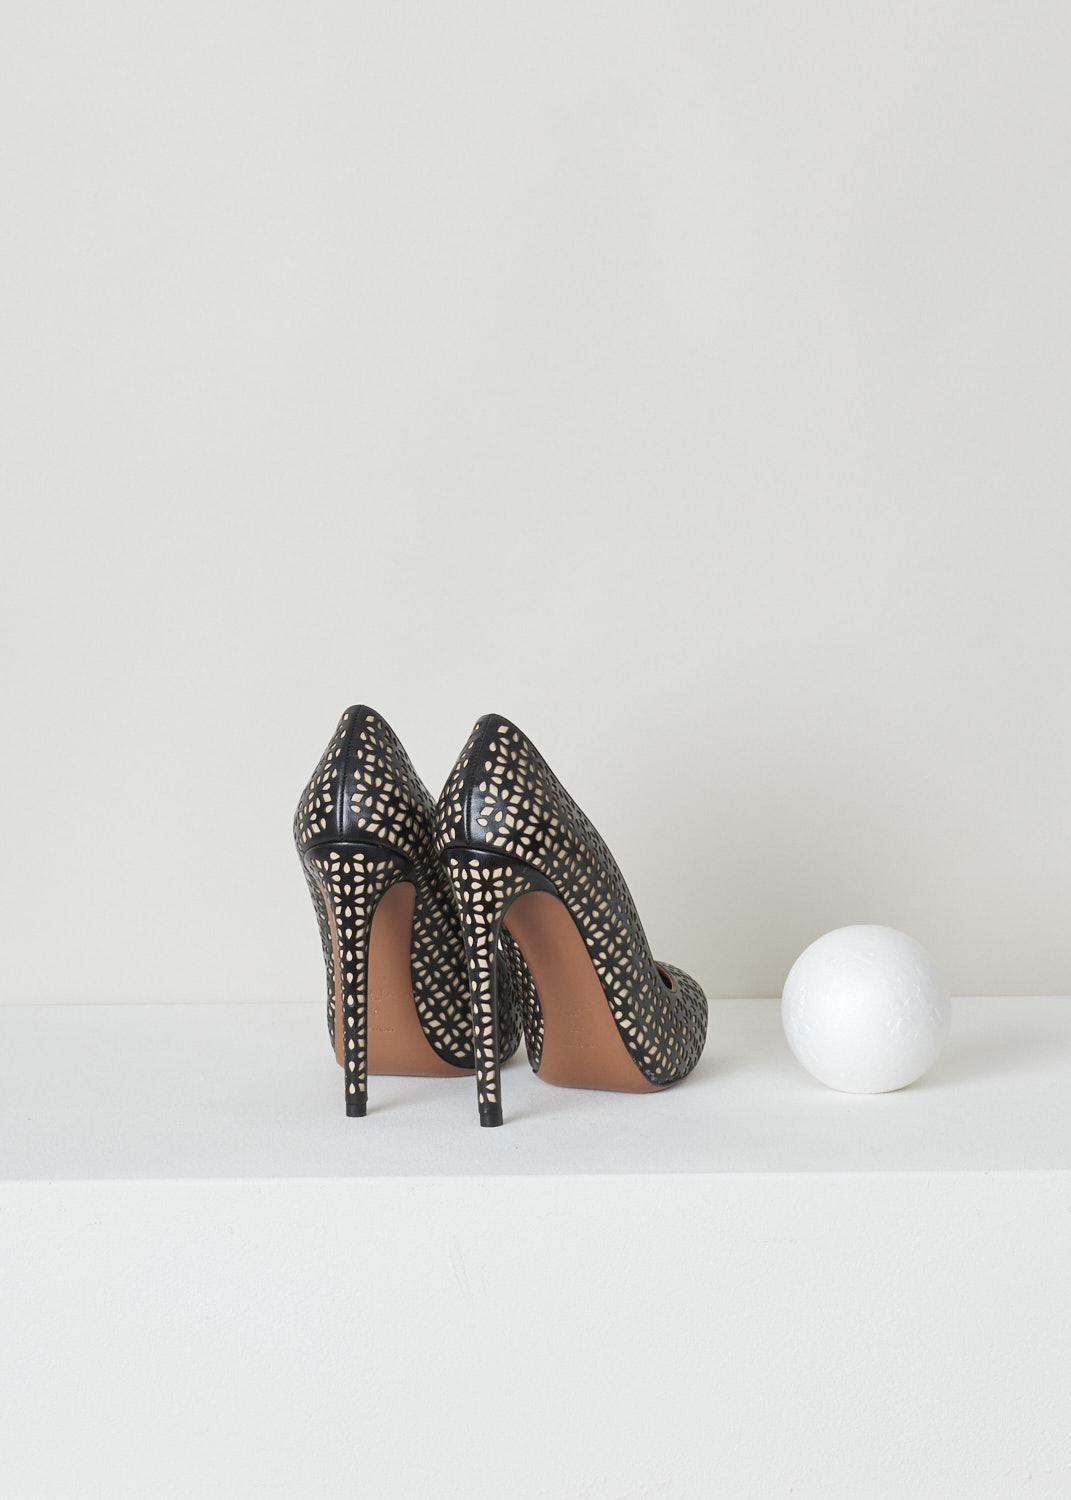 AlaÃ¯a, Black high heeled laser-cut pump, 3S2I013CE01_noir_roche_C950, black, back, Lovely high heel pumps comes in a two-tone colour palette, being the beige background colour which is adorned with this black signature laser-cut Vienne motif on top. Furthermore, this model has a round nose and black trimmed topline. 

Heel height: 11 cm / 4.3 inch. 
